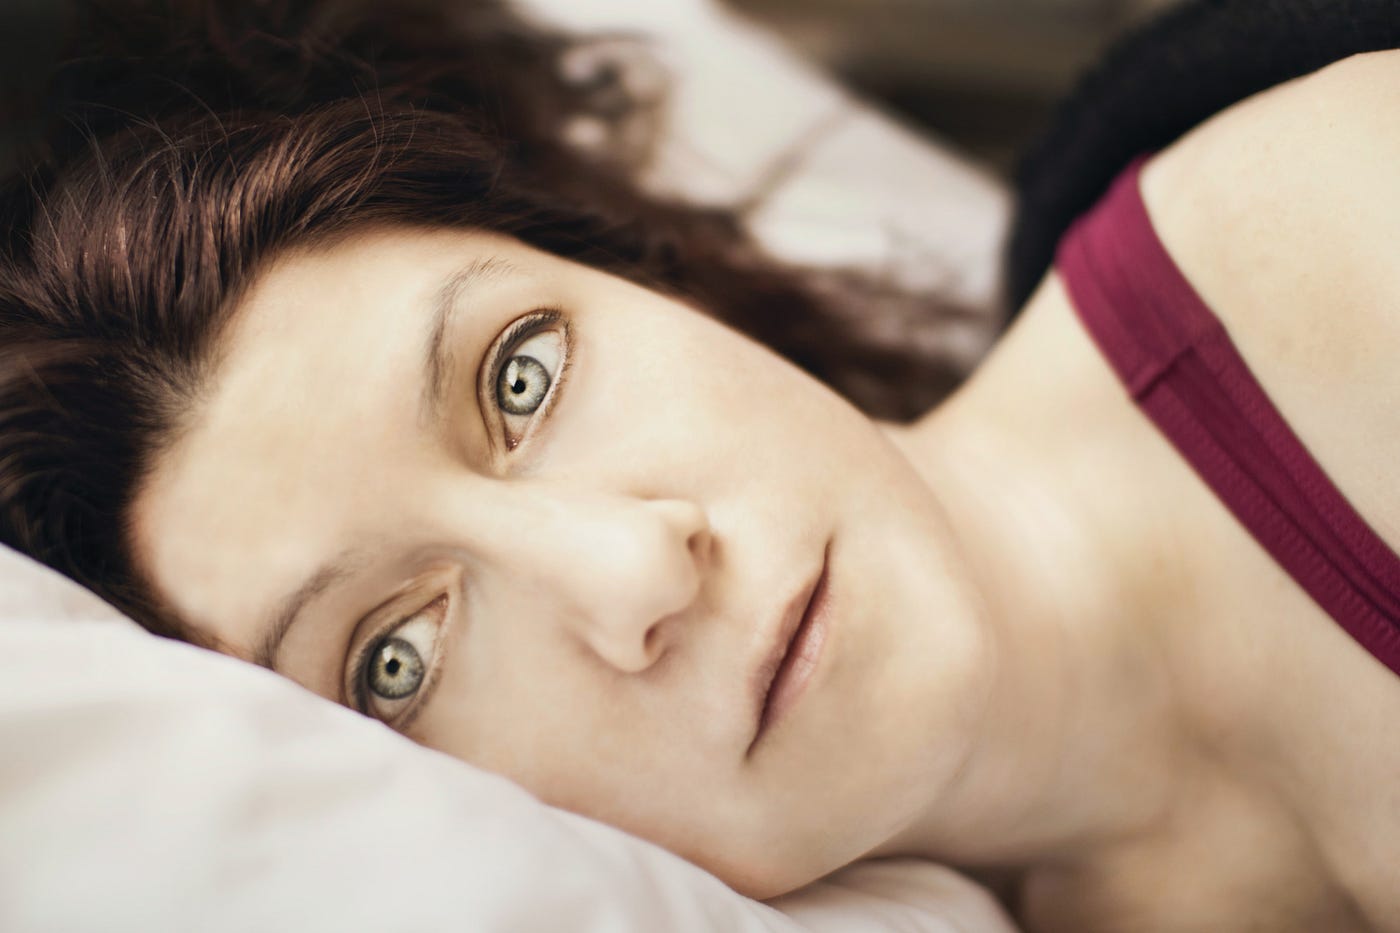 A wide-eyed woman rests her head on a pillow, suffering from insomnia.